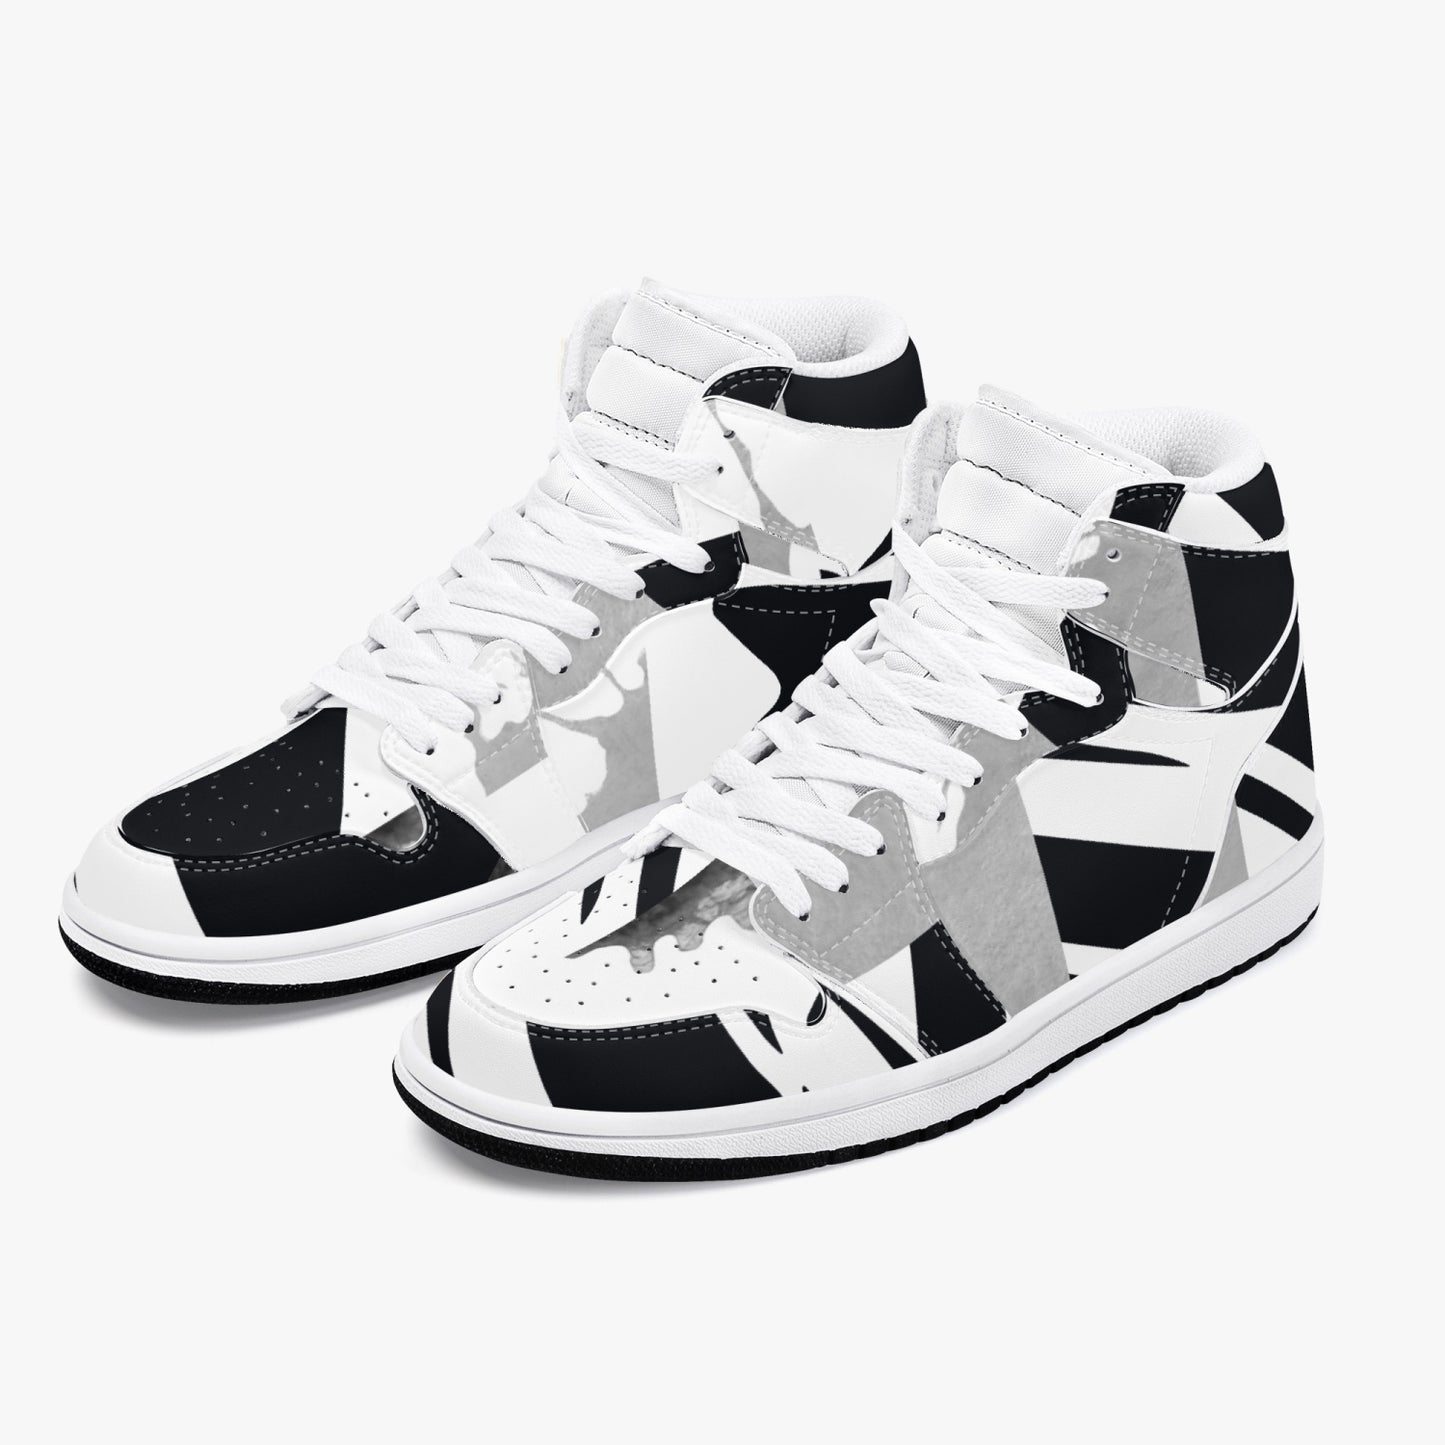 High-Top Leather Sneakers